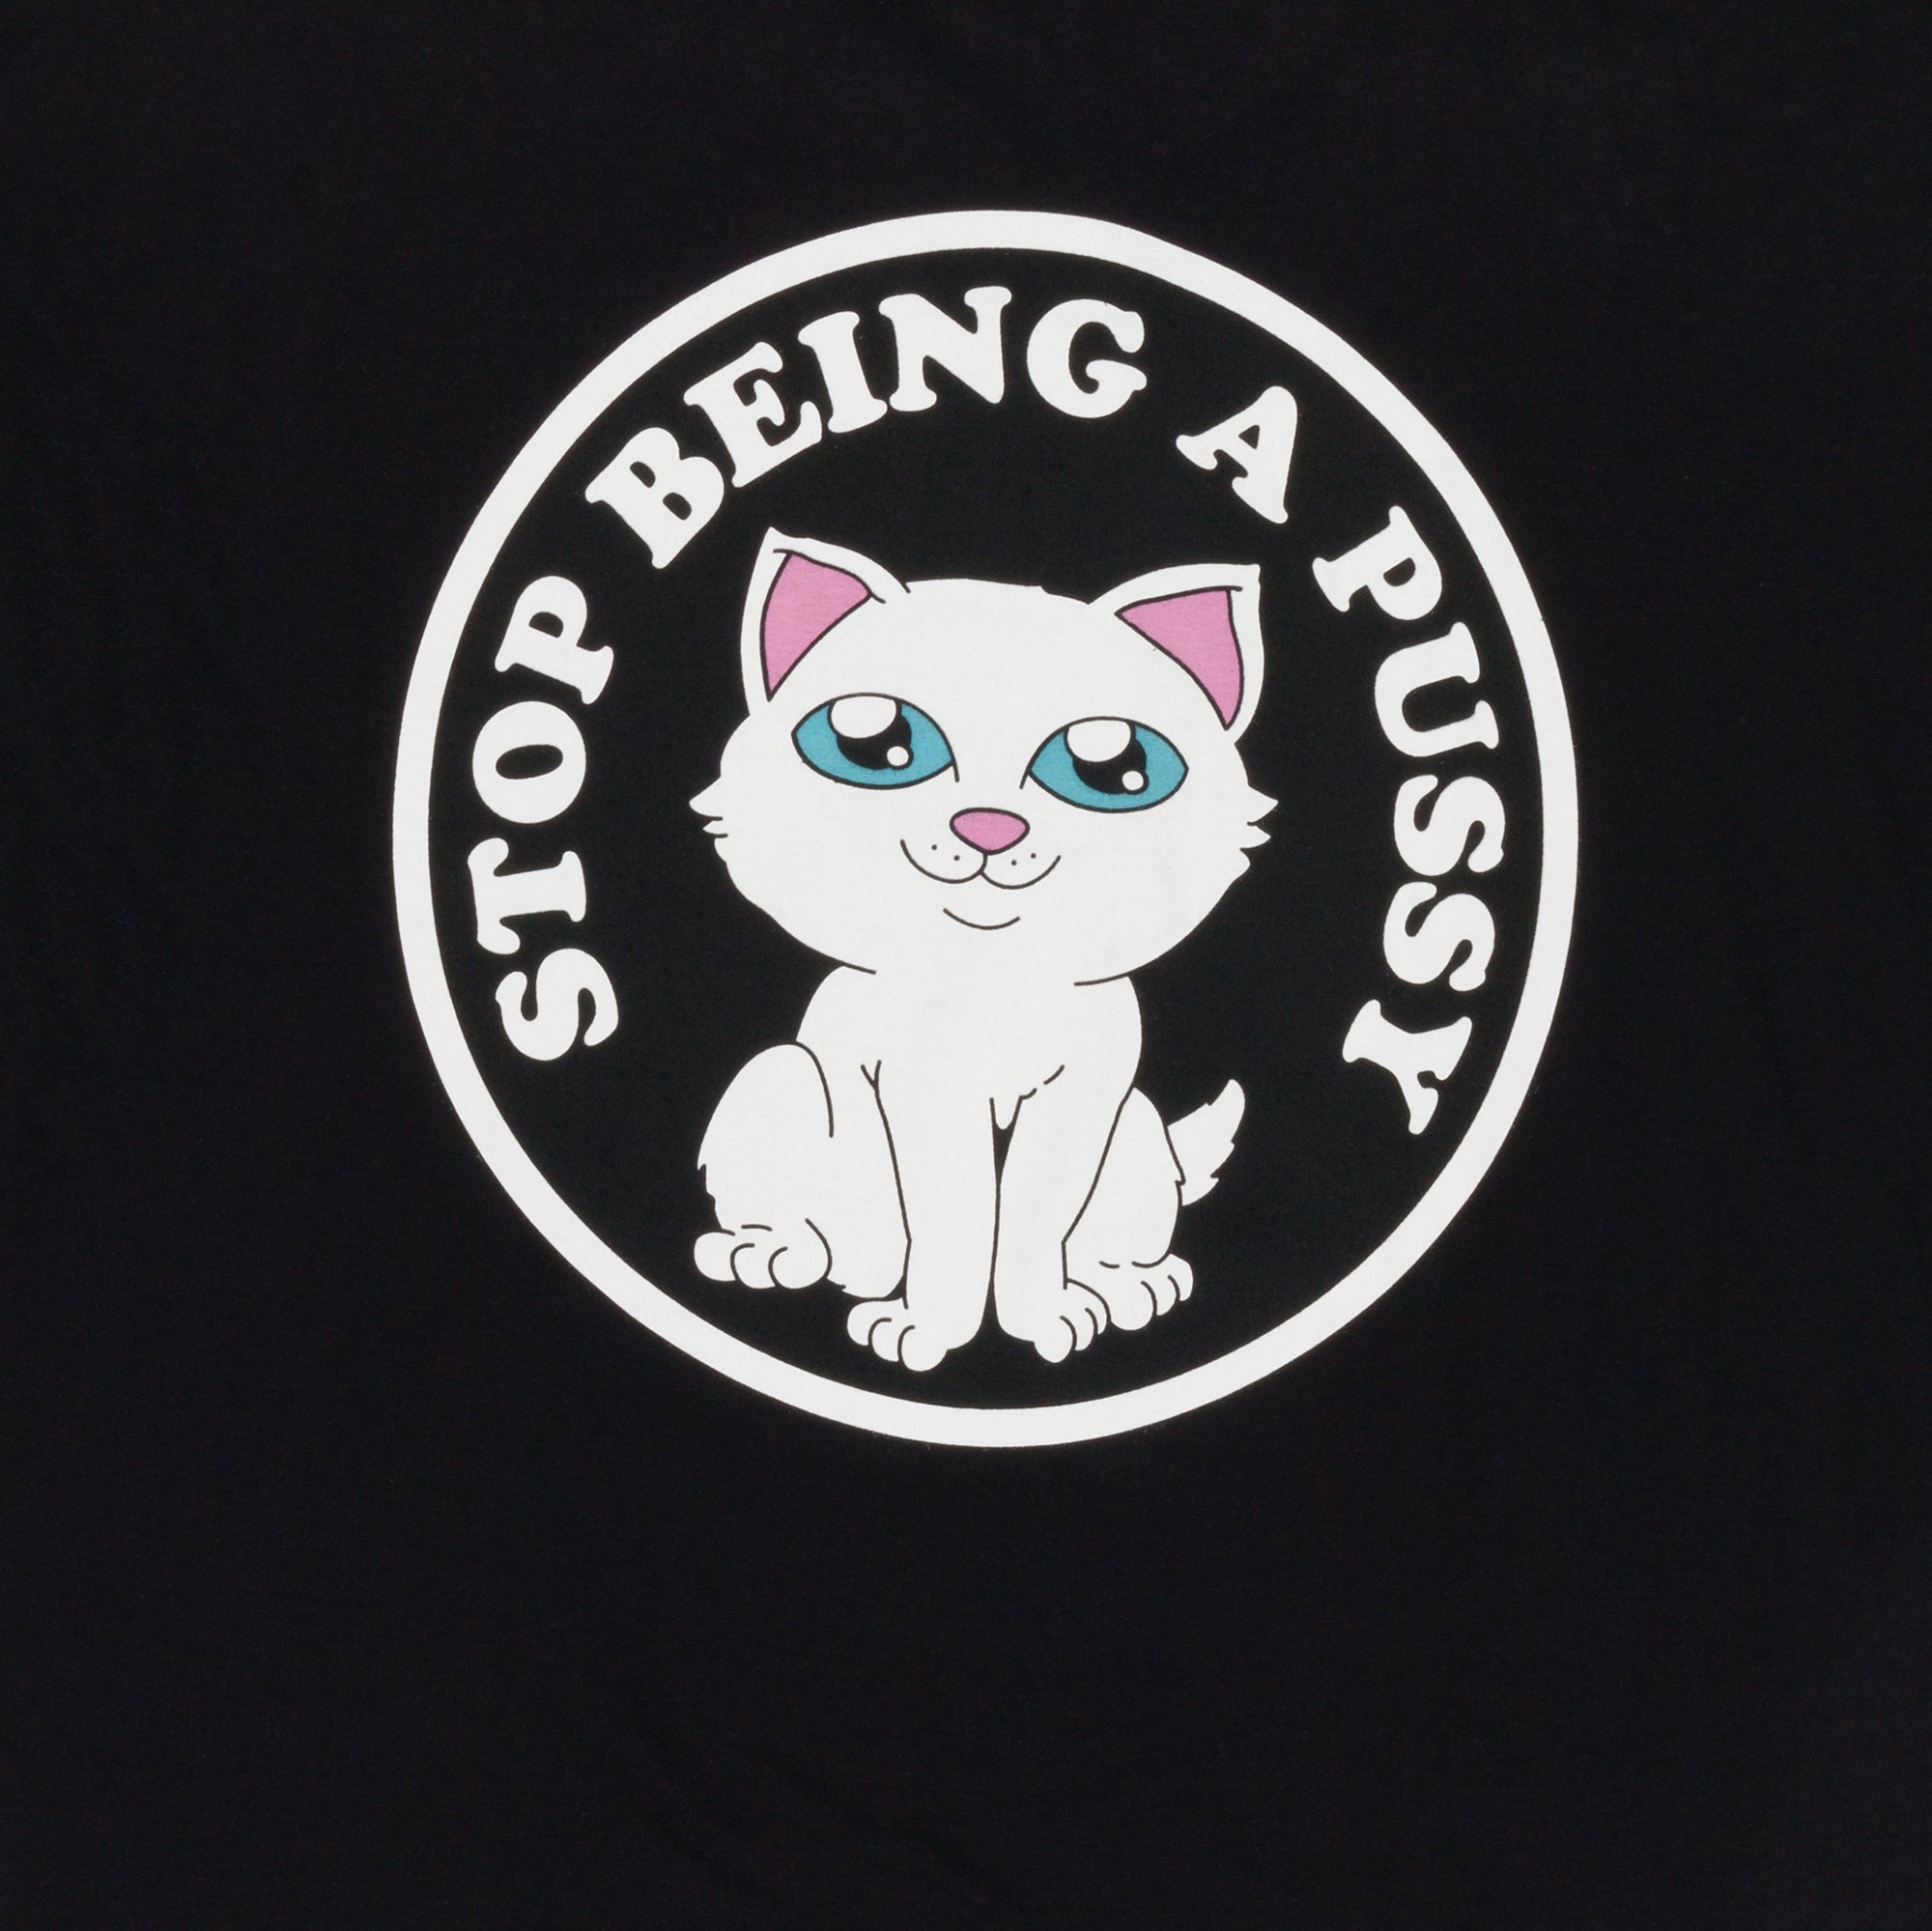 Stop Being A Pussy Tee (Black)